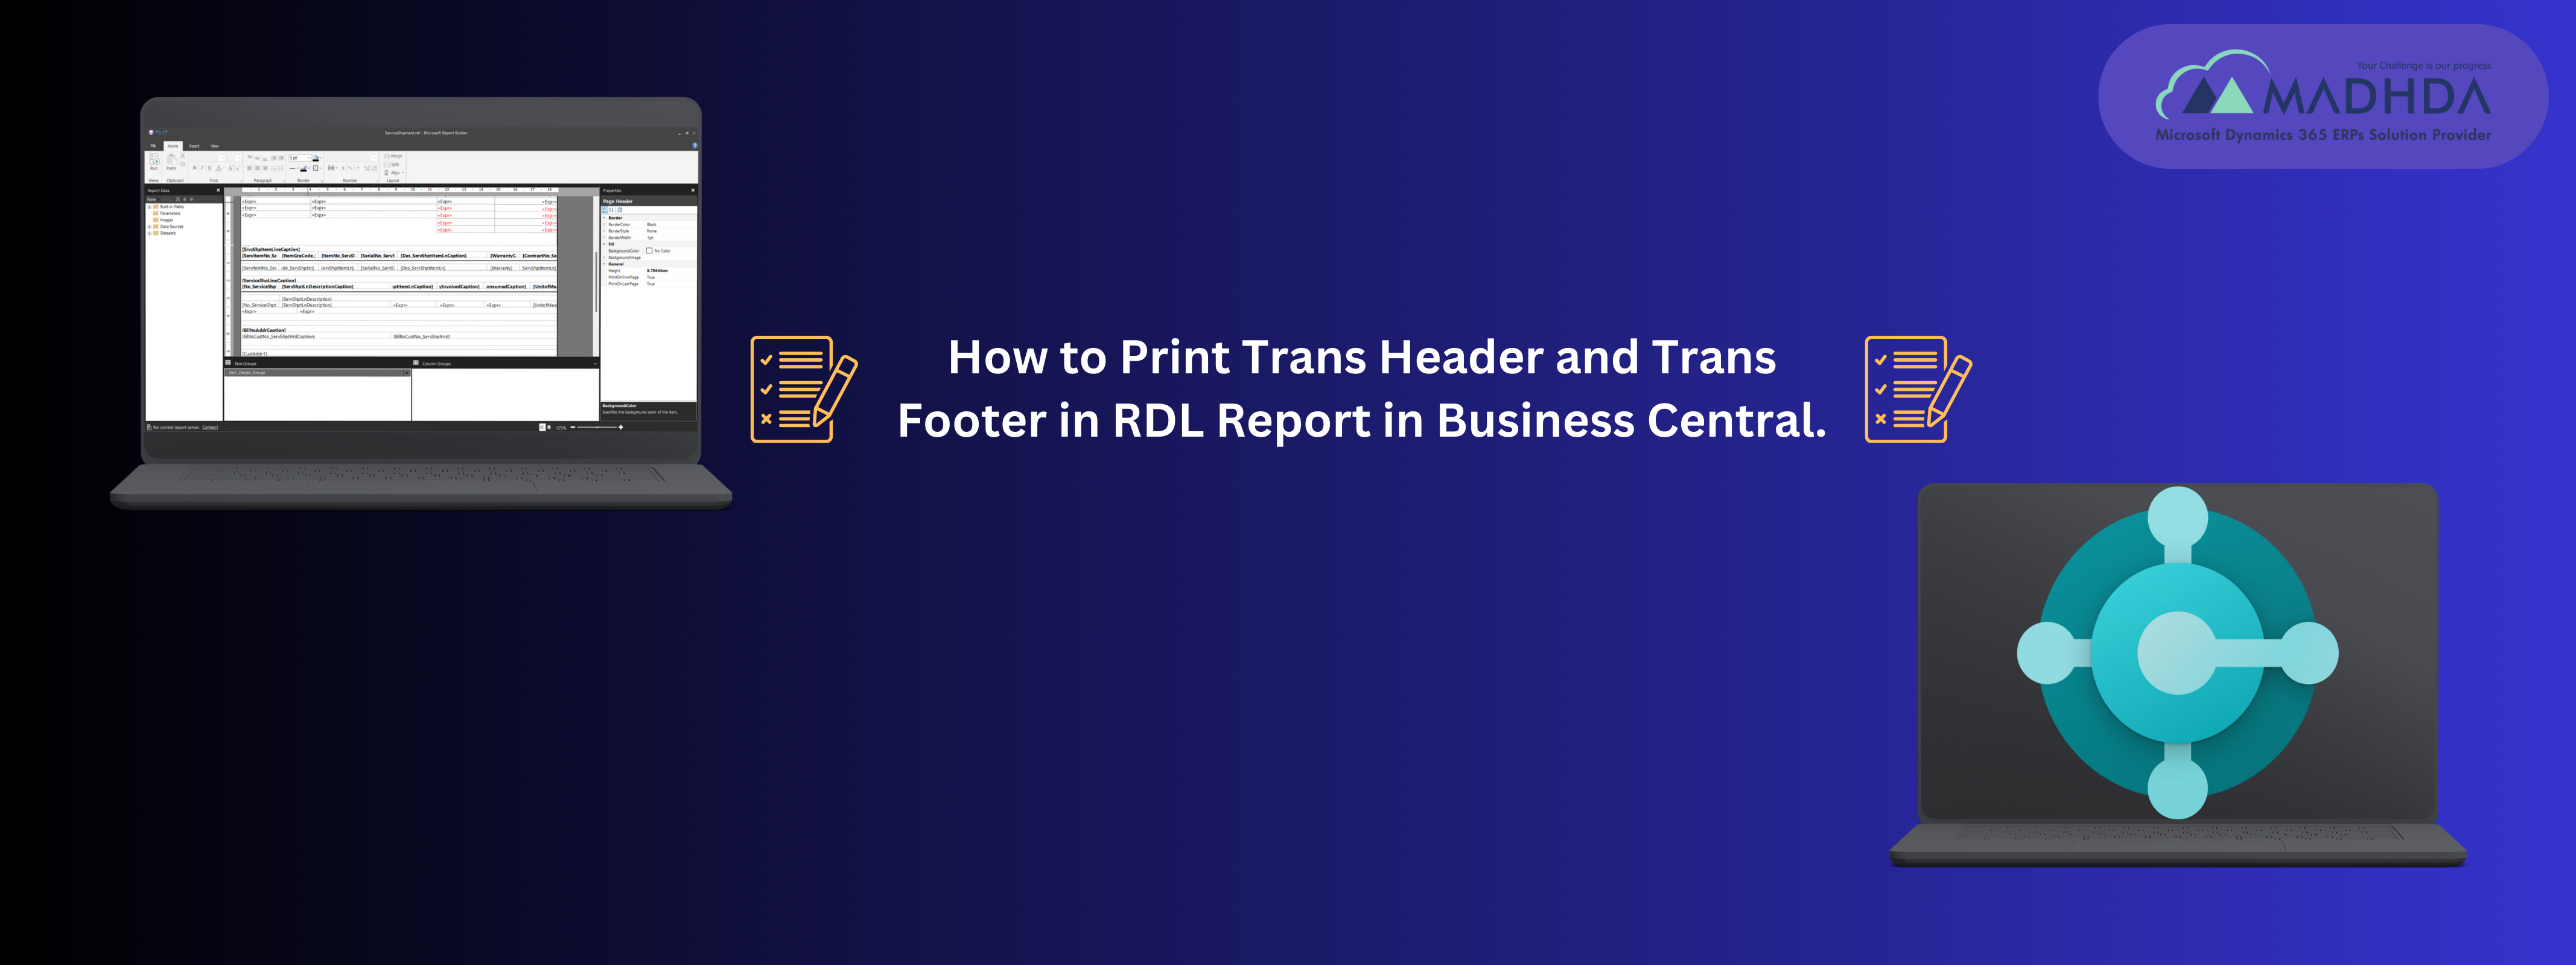 How to Print Trans Header and Trans Footer in RDL Report